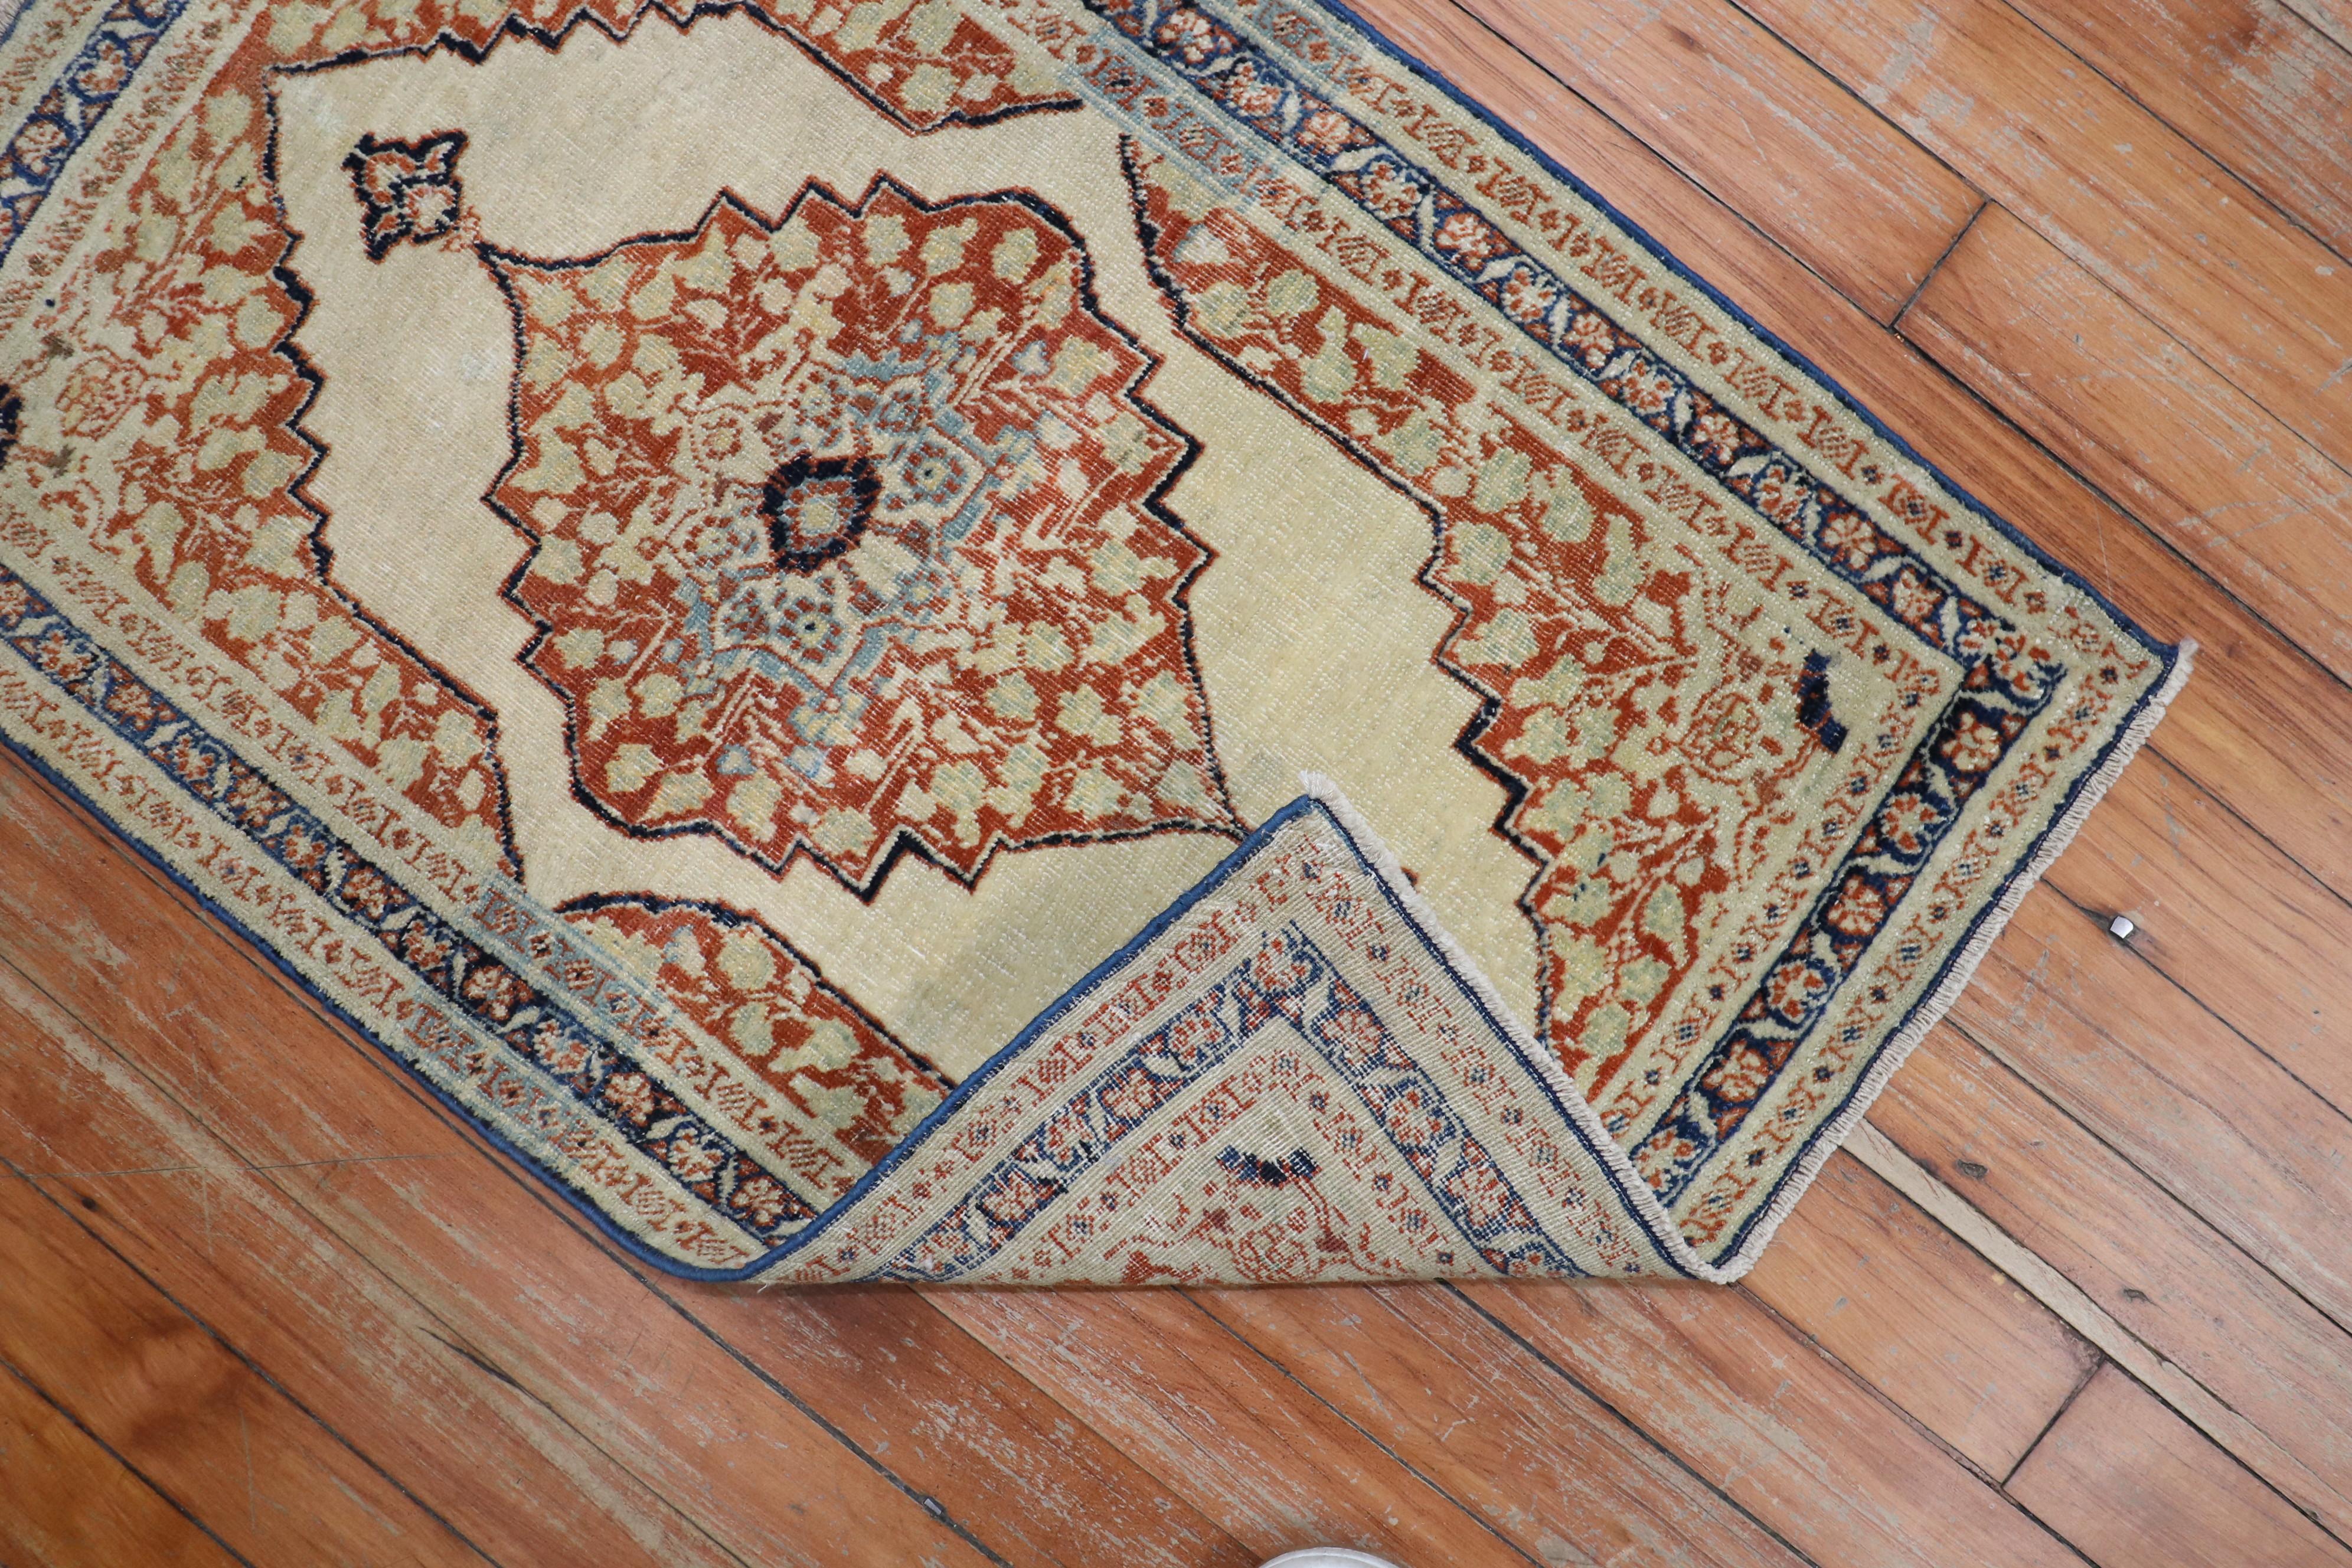 A remarkable Tabriz rug woven by Hadji Jalili workshop in the city of Tabriz. Predominant colors in salmon orange cream and blues the weave, craftsmanship and quality on the rug is superfine. For the rug Connoisseur, circa 1880s.

Size: 1'8